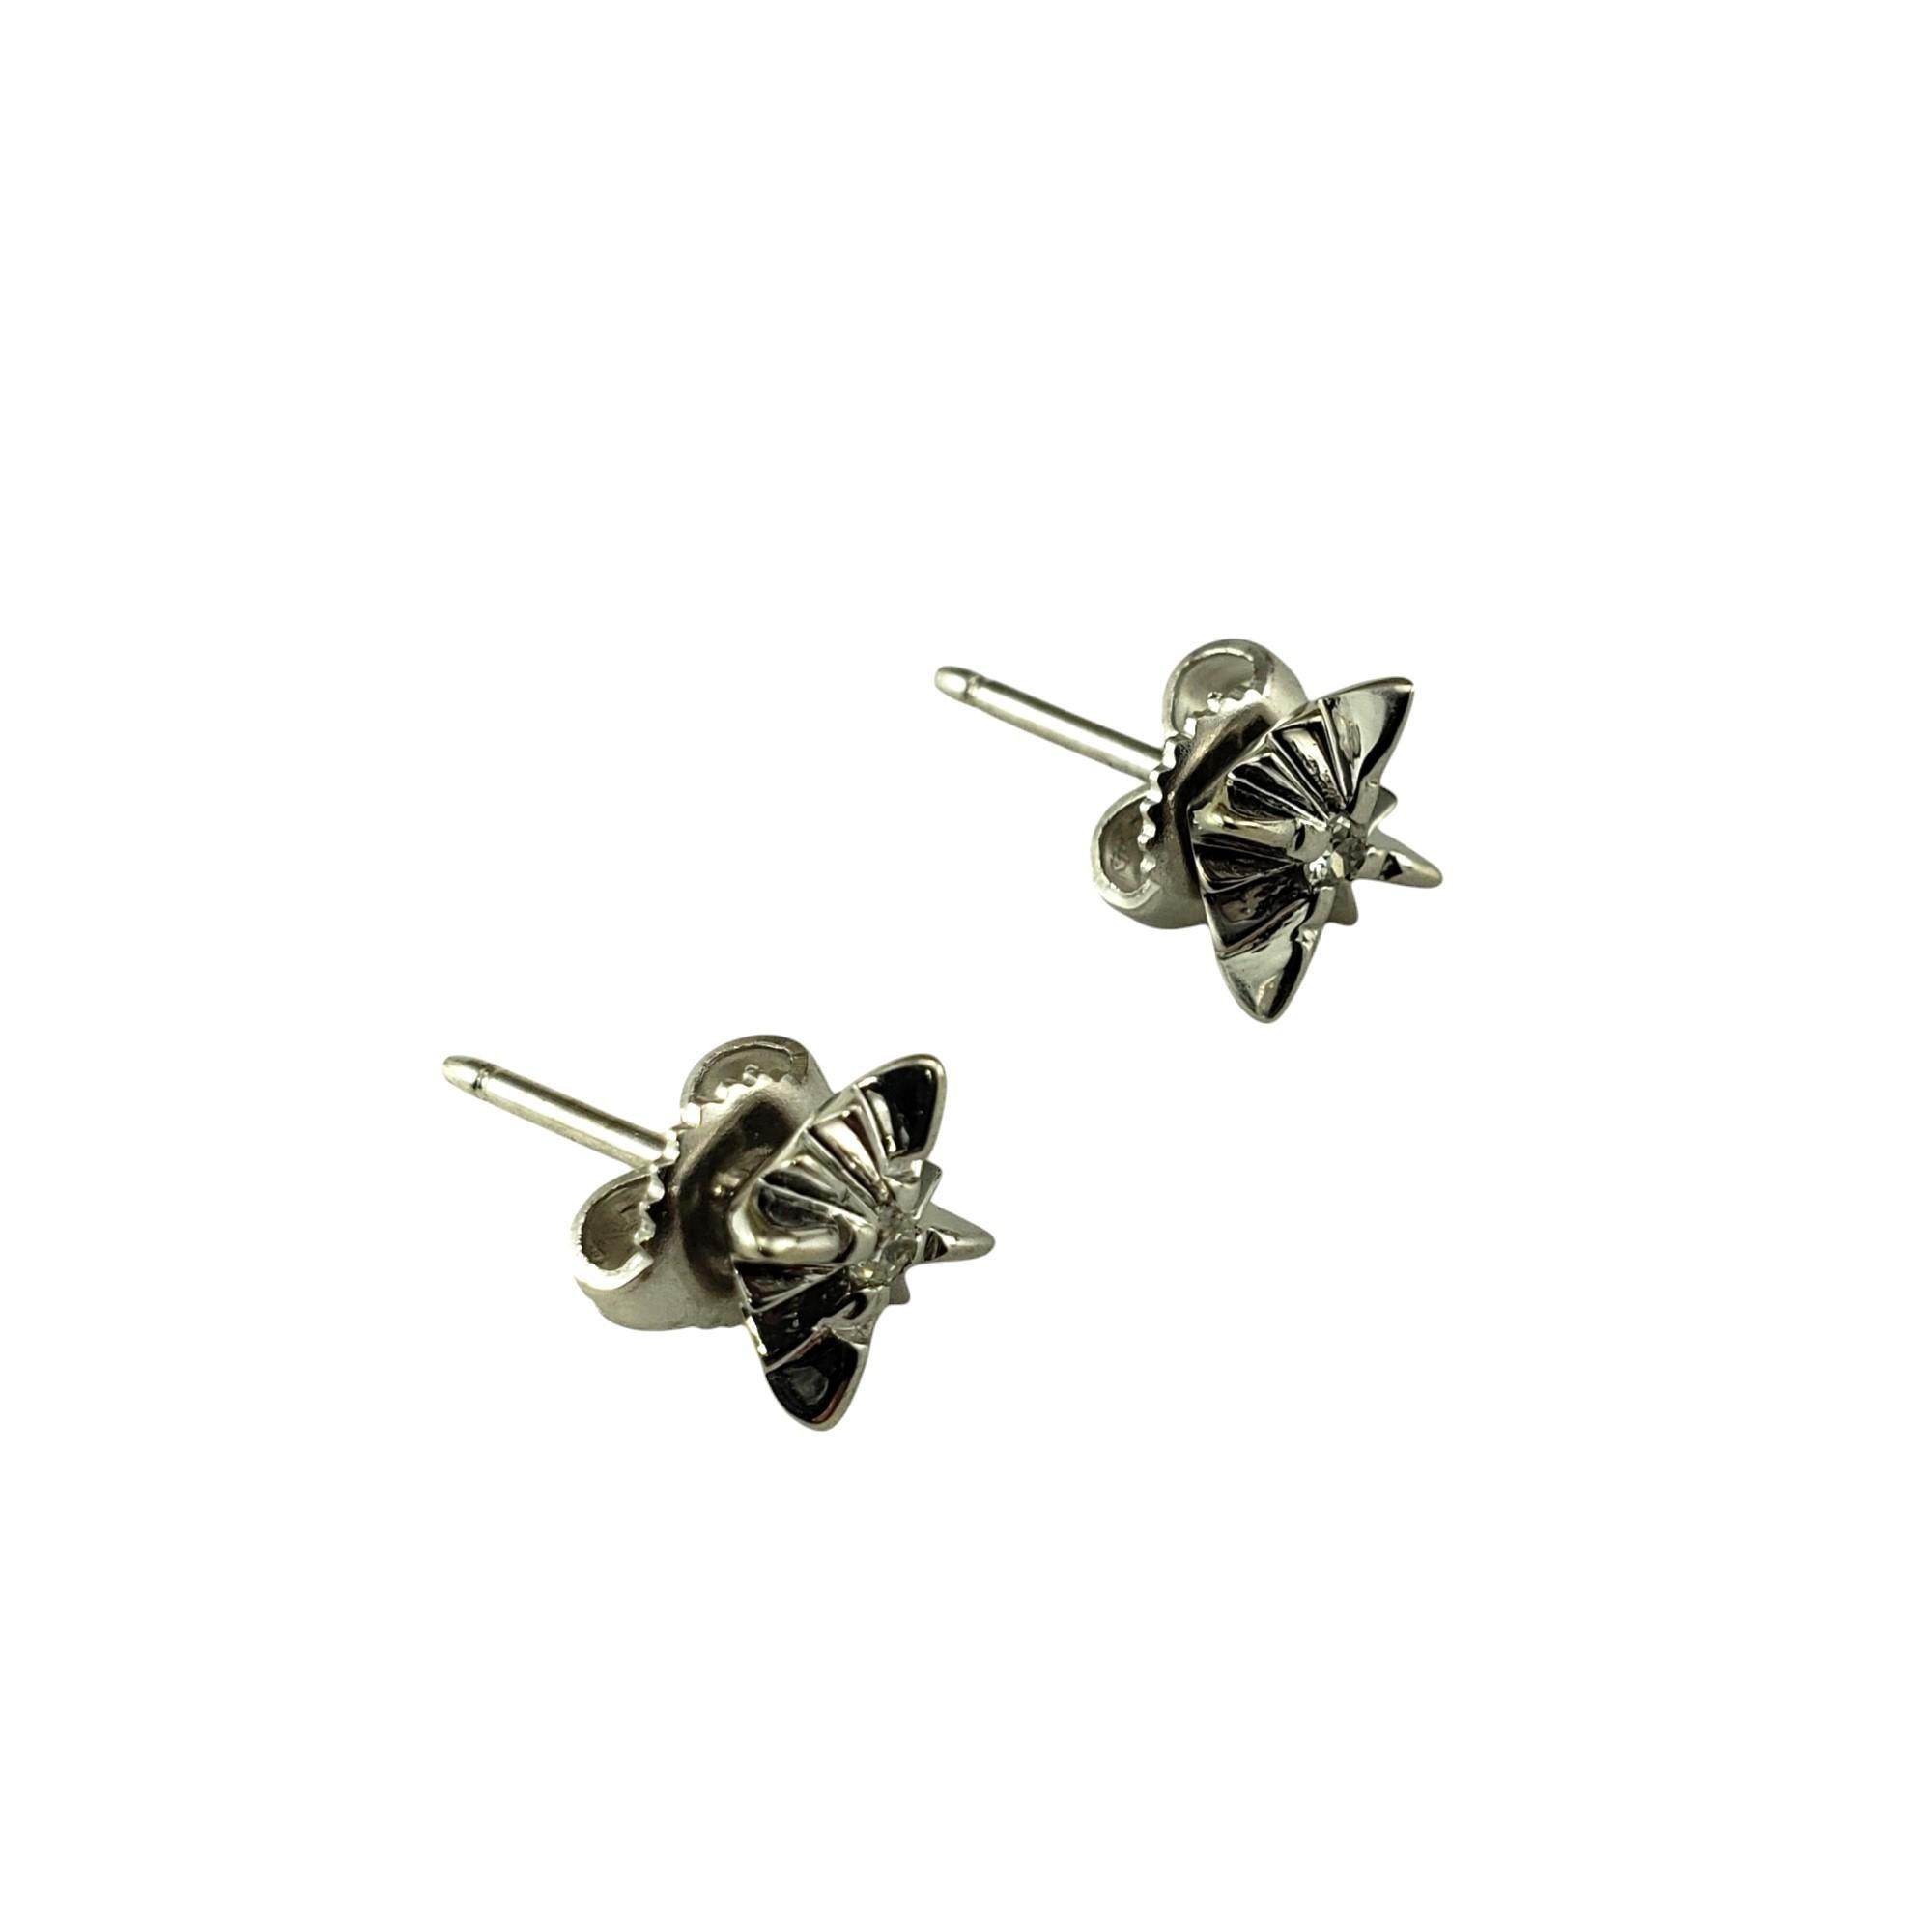 14 Karat White Gold and Diamond Stud Earrings #17158 In Good Condition For Sale In Washington Depot, CT